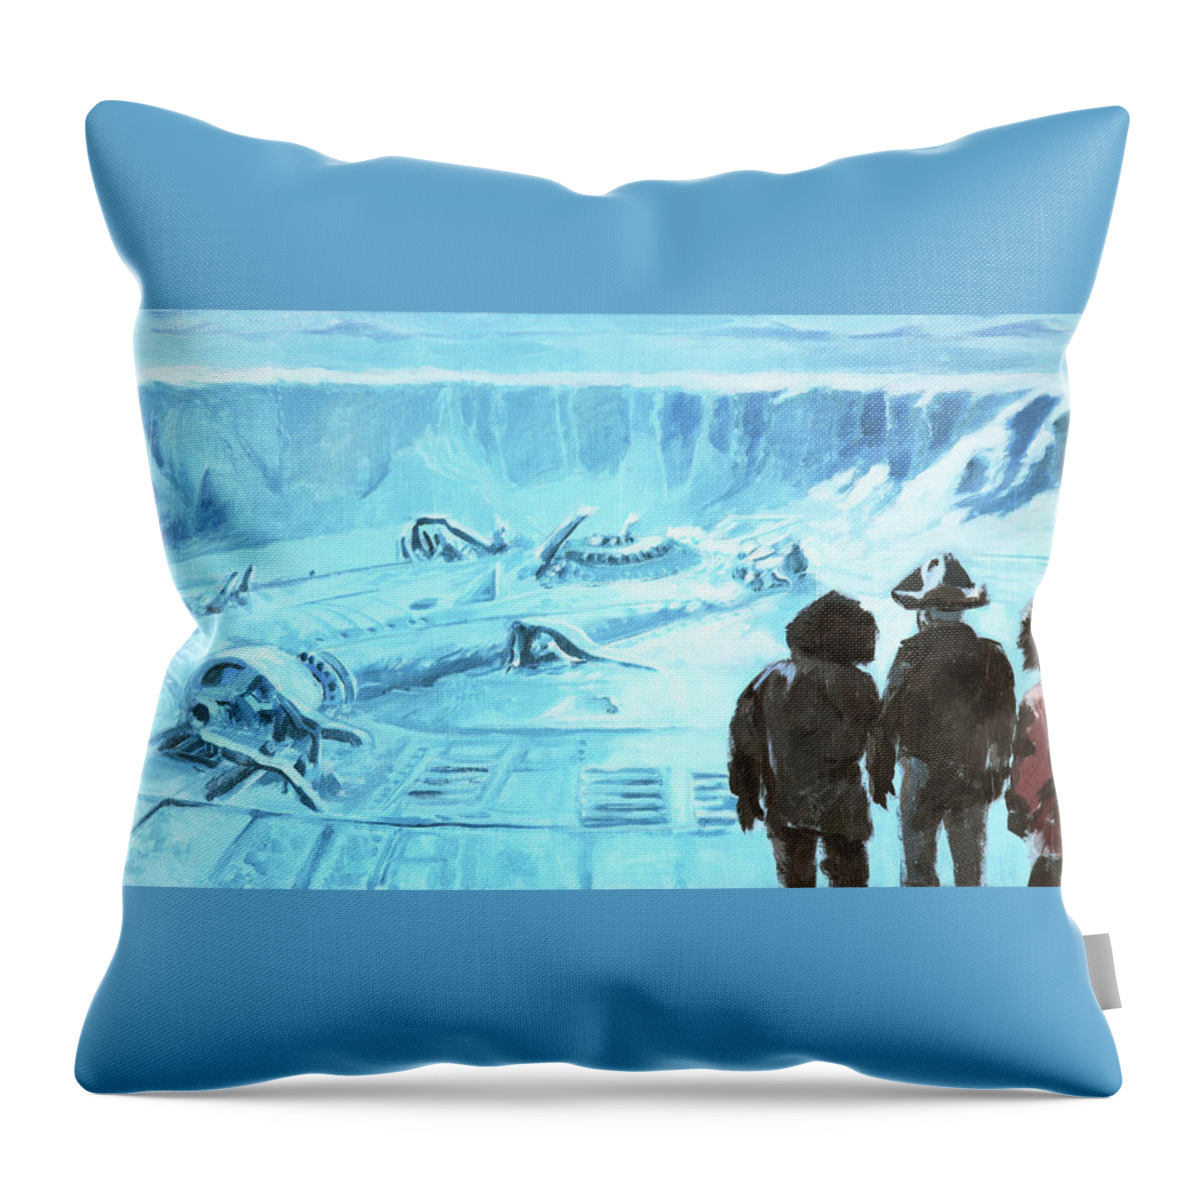 The Thing Throw Pillow featuring the painting The Thing - Discovery by Sv Bell